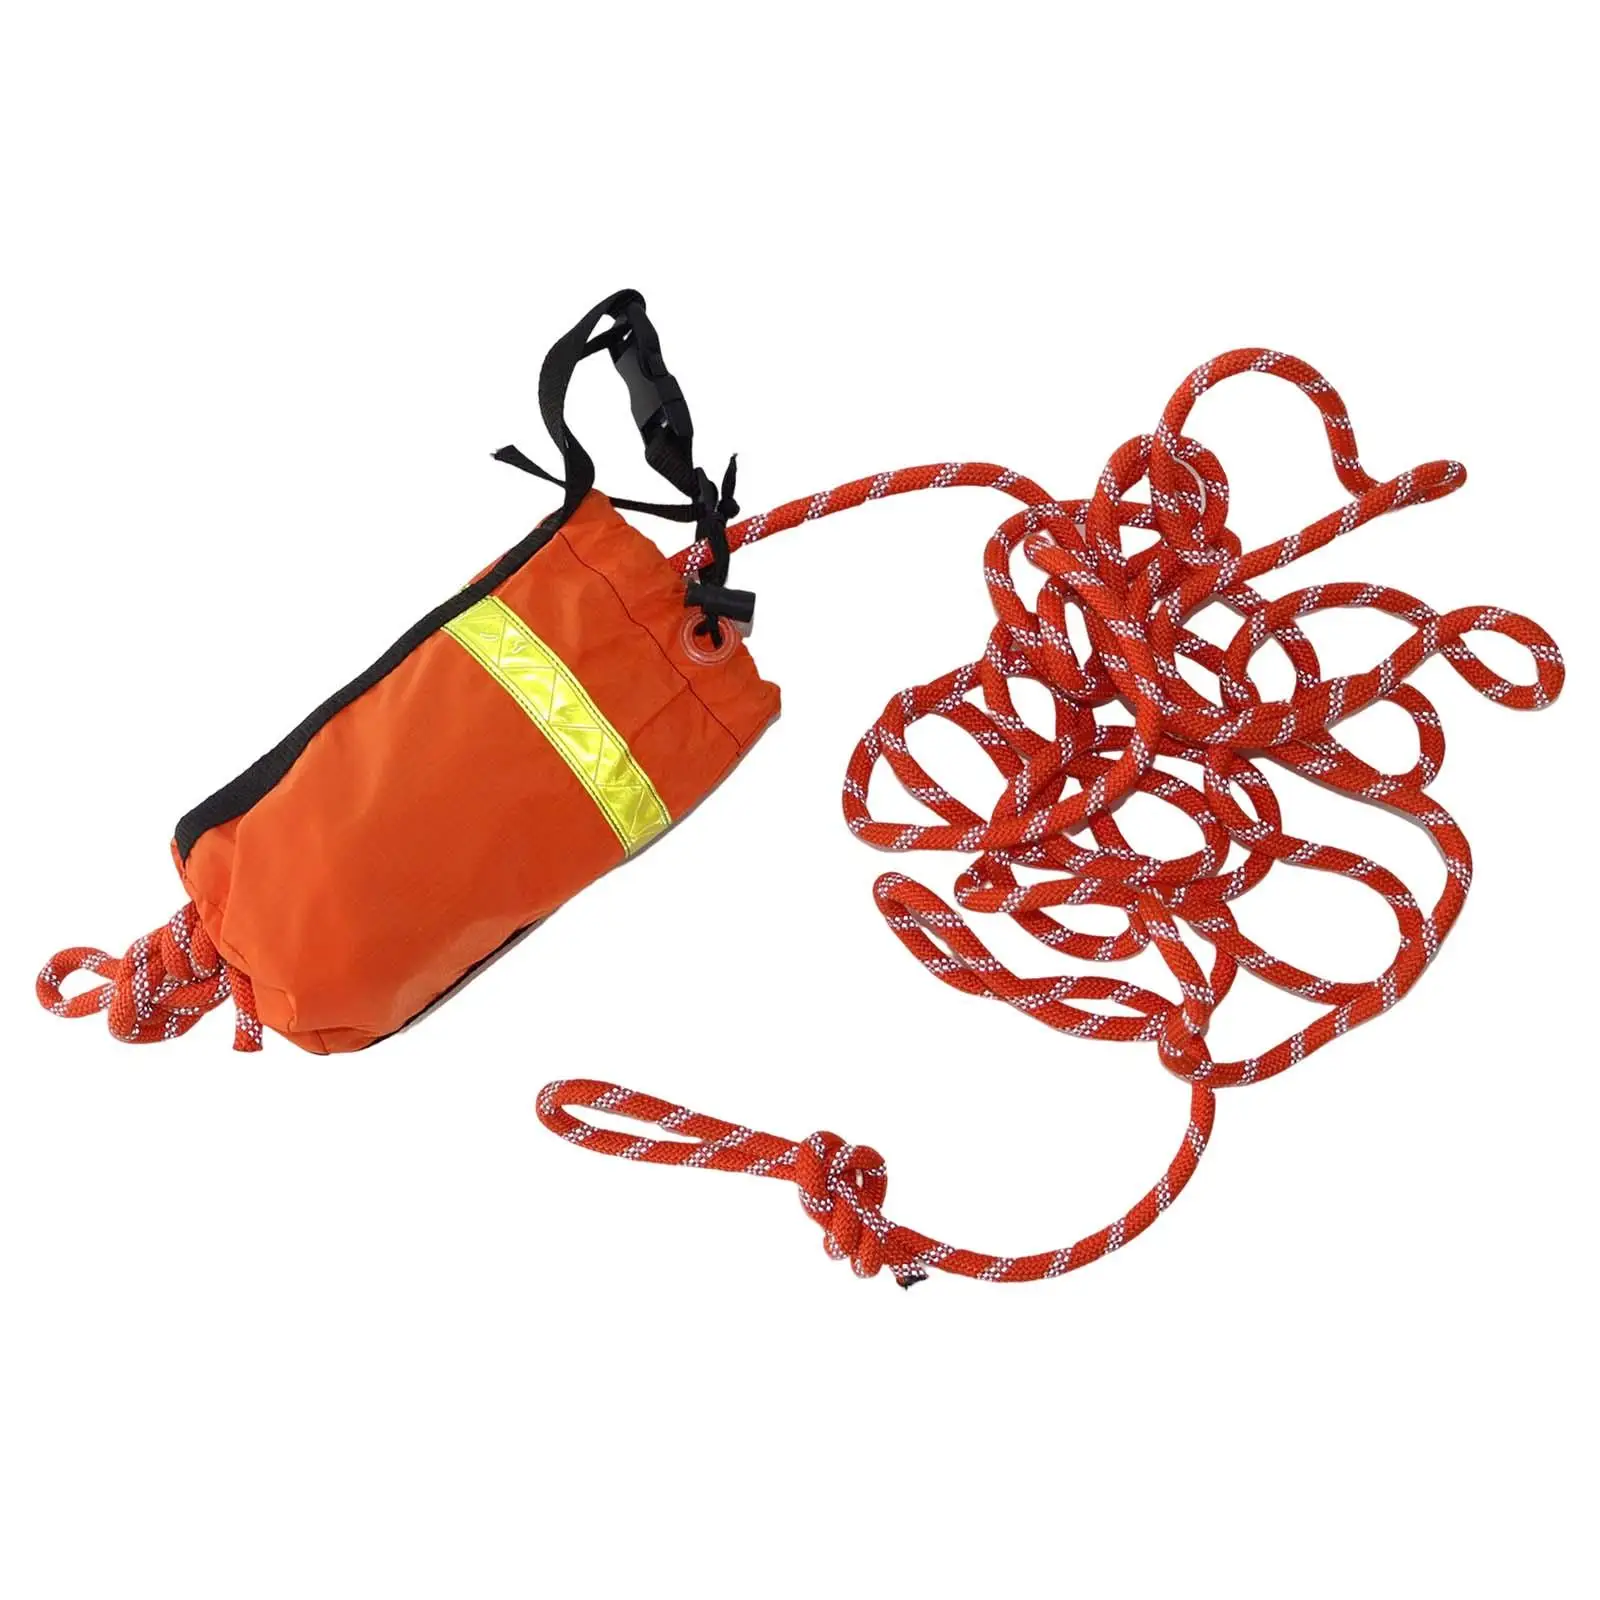 Water Floating Rope High Visibility Equipment for Boating Rafting Kayaking